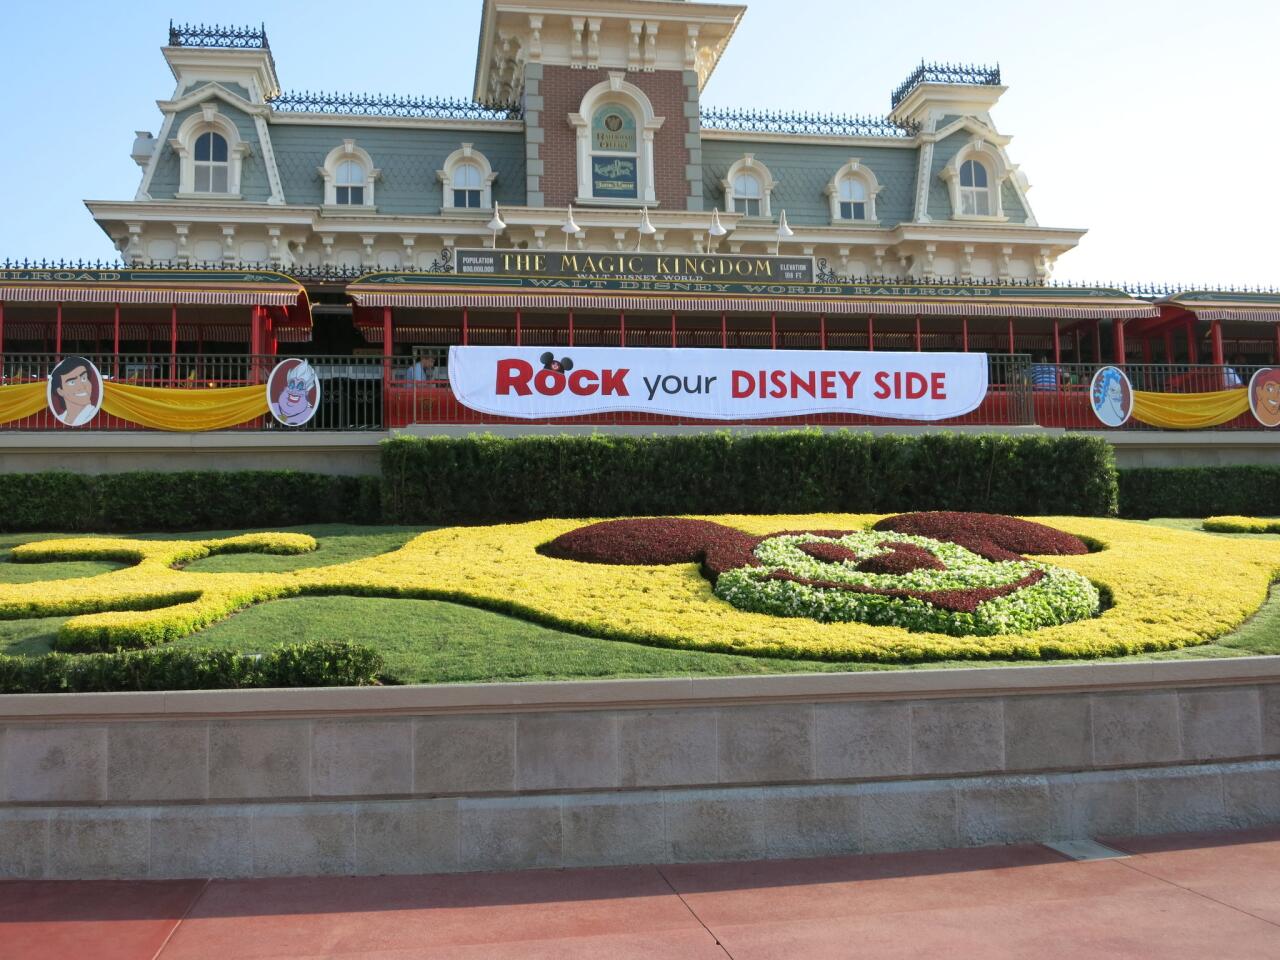 Rock Your Disney Side 24-hour event